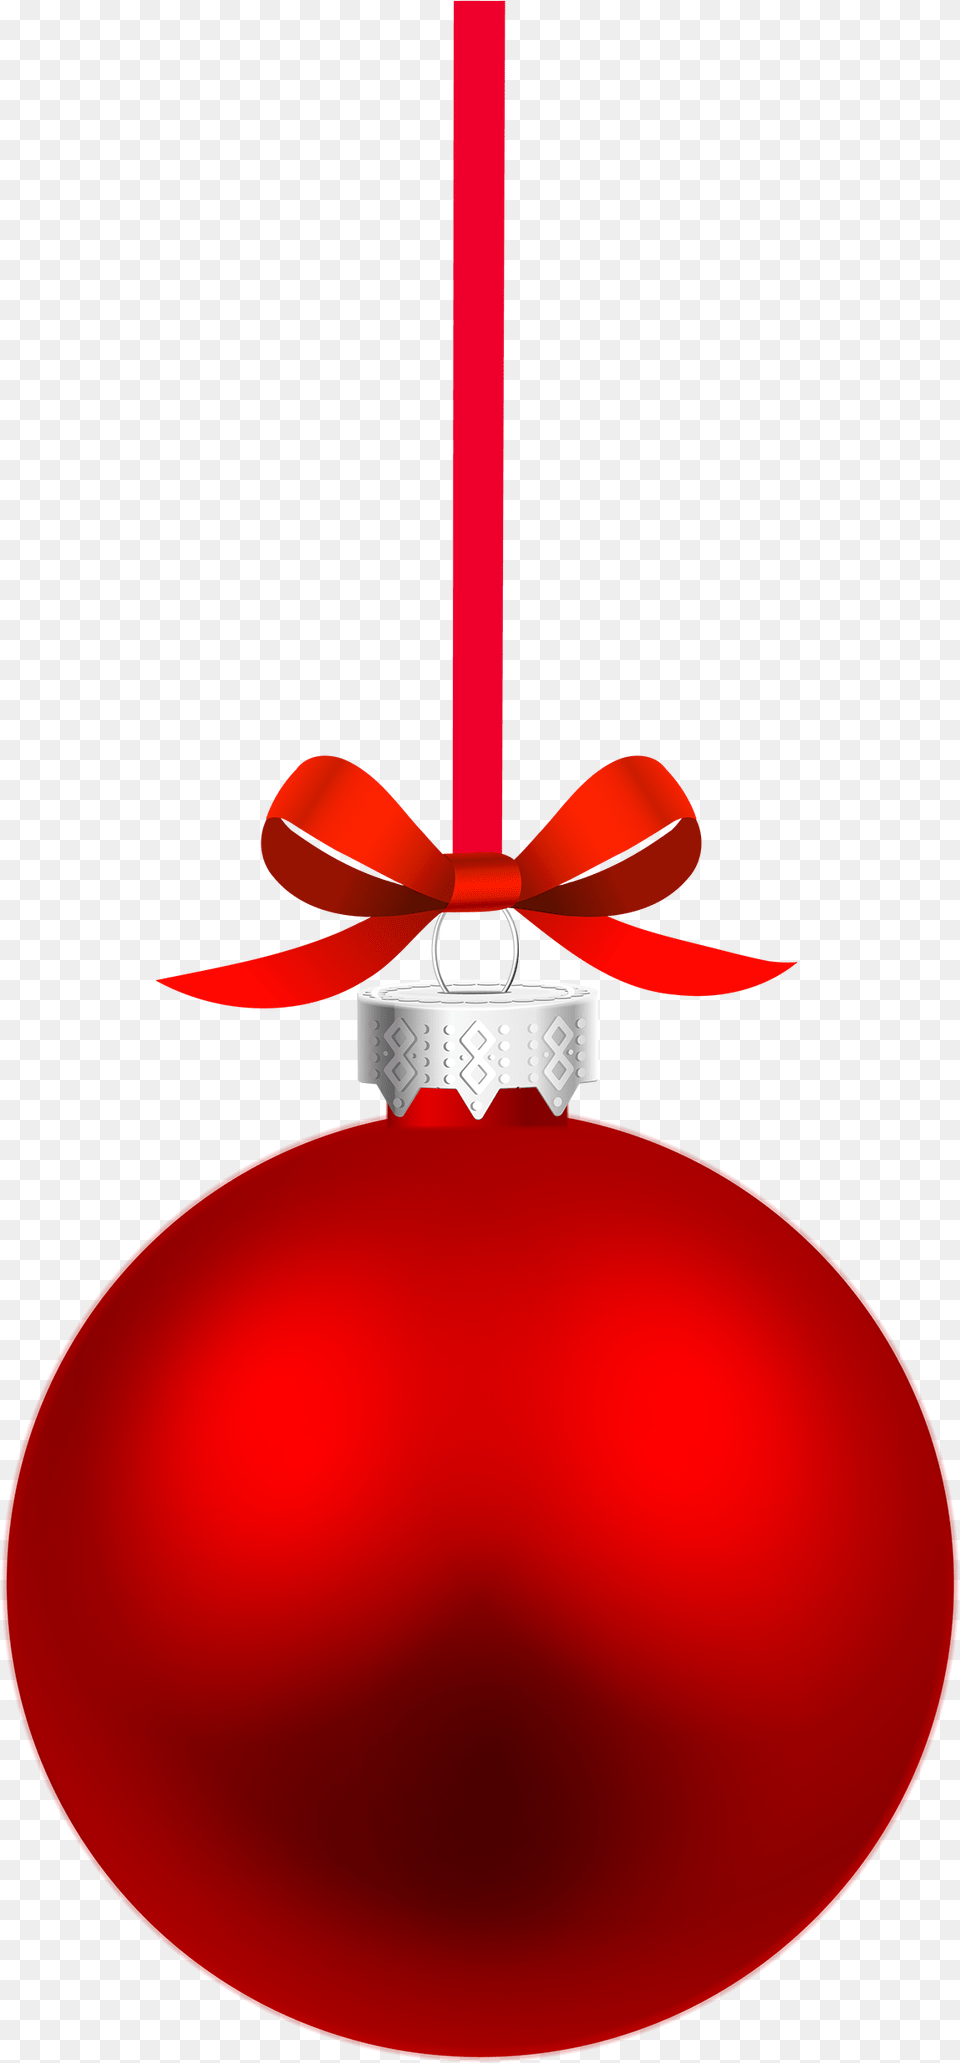 Christmas Ornament Clip Art Red Christmas Ball, Accessories Png